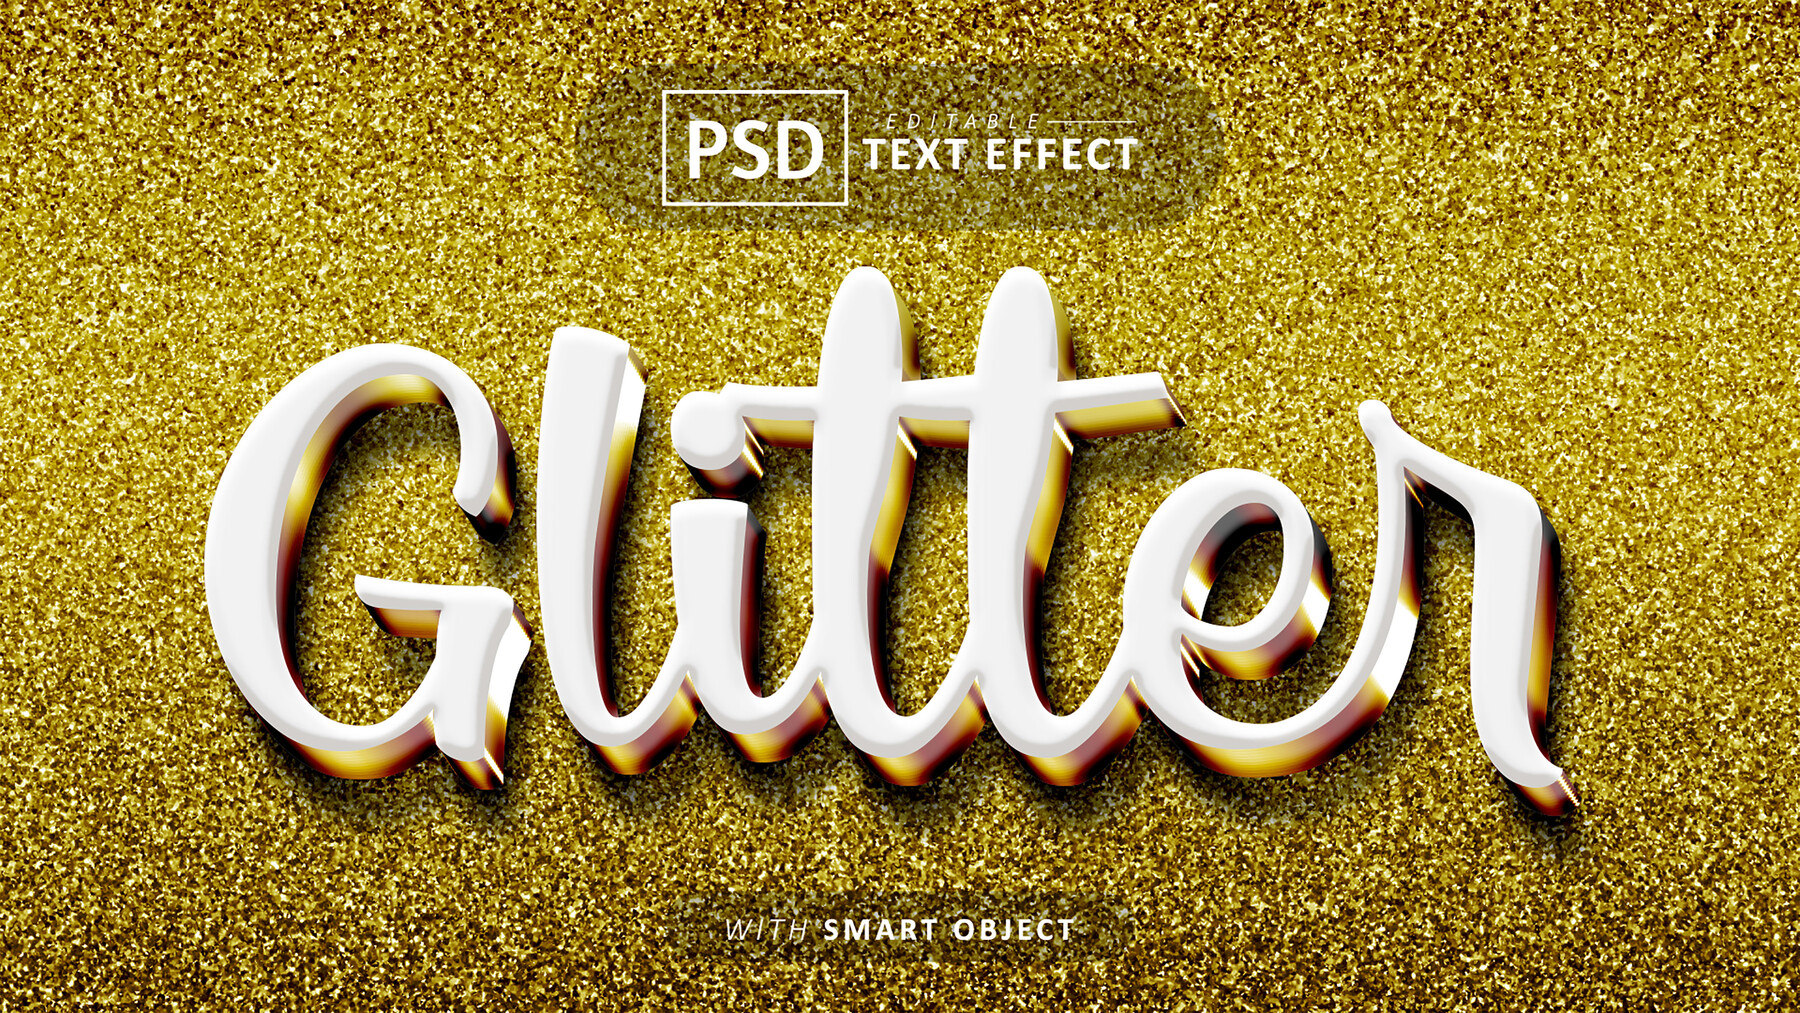 Quick Tip: Create Sparkling, Animated Text in Photoshop